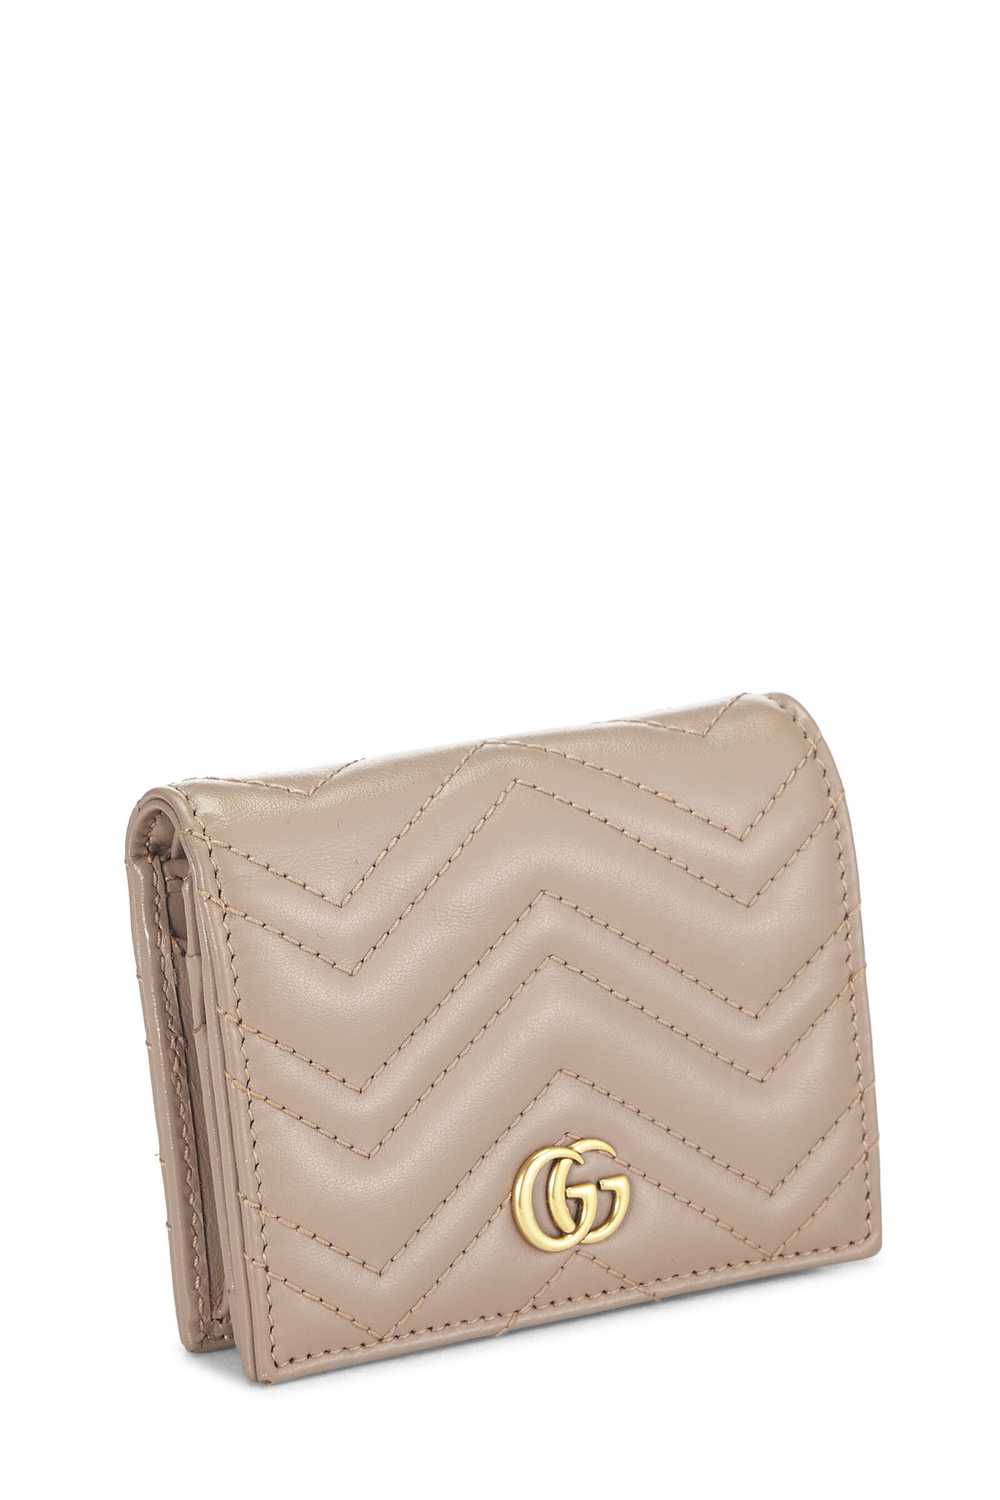 Pink Leather GG Marmont Compact Wallet - image 2